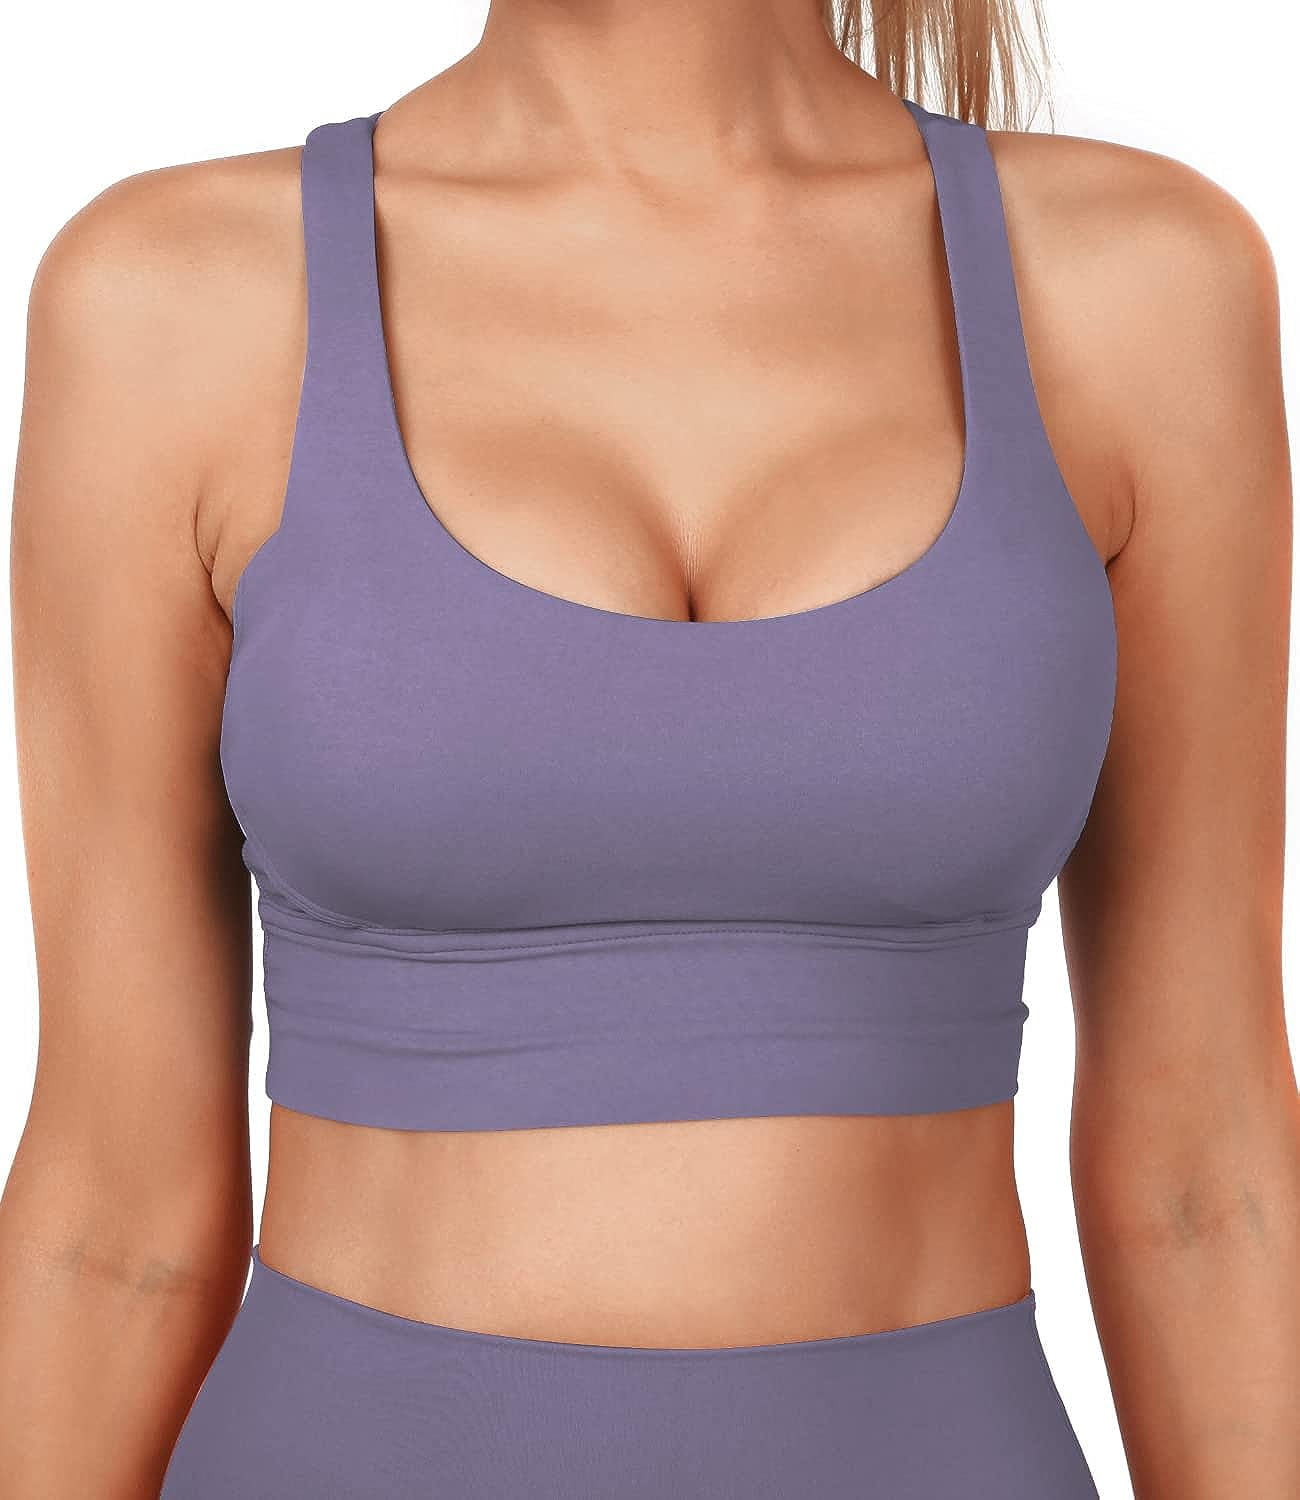 Grace Form Strappy Sports Bra for Women Padded High Impact Push Up Athletic  Running Sports Bra Workout Top Yoga Bra 